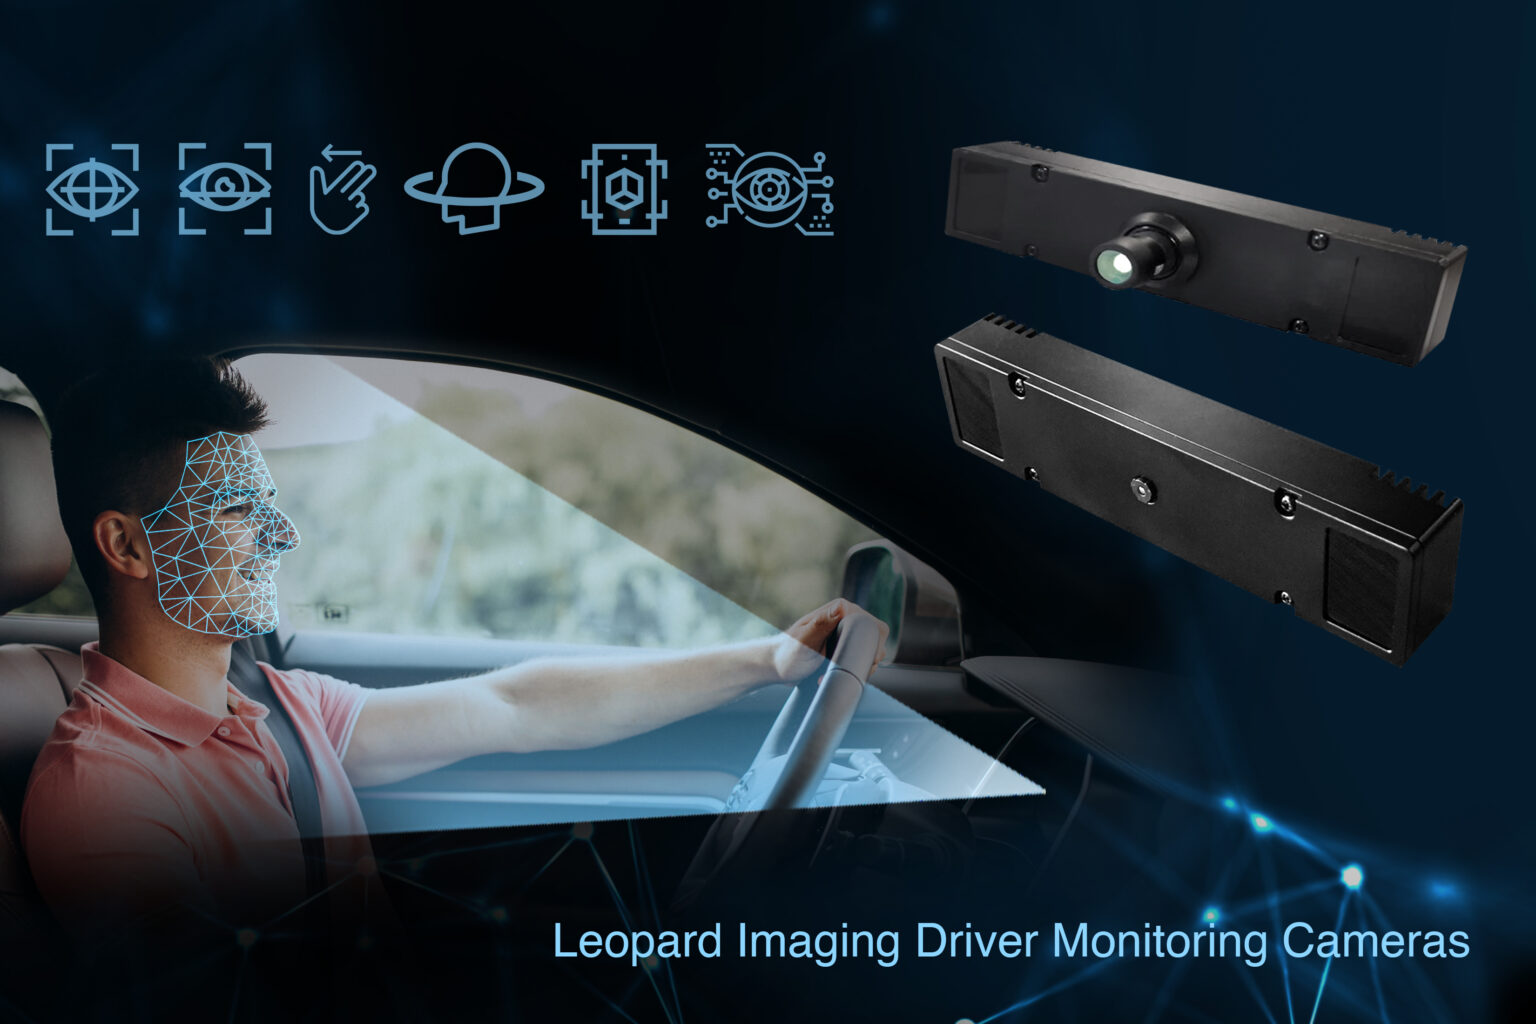 Leopard launches camerabased driver monitoring systems Safe Car News